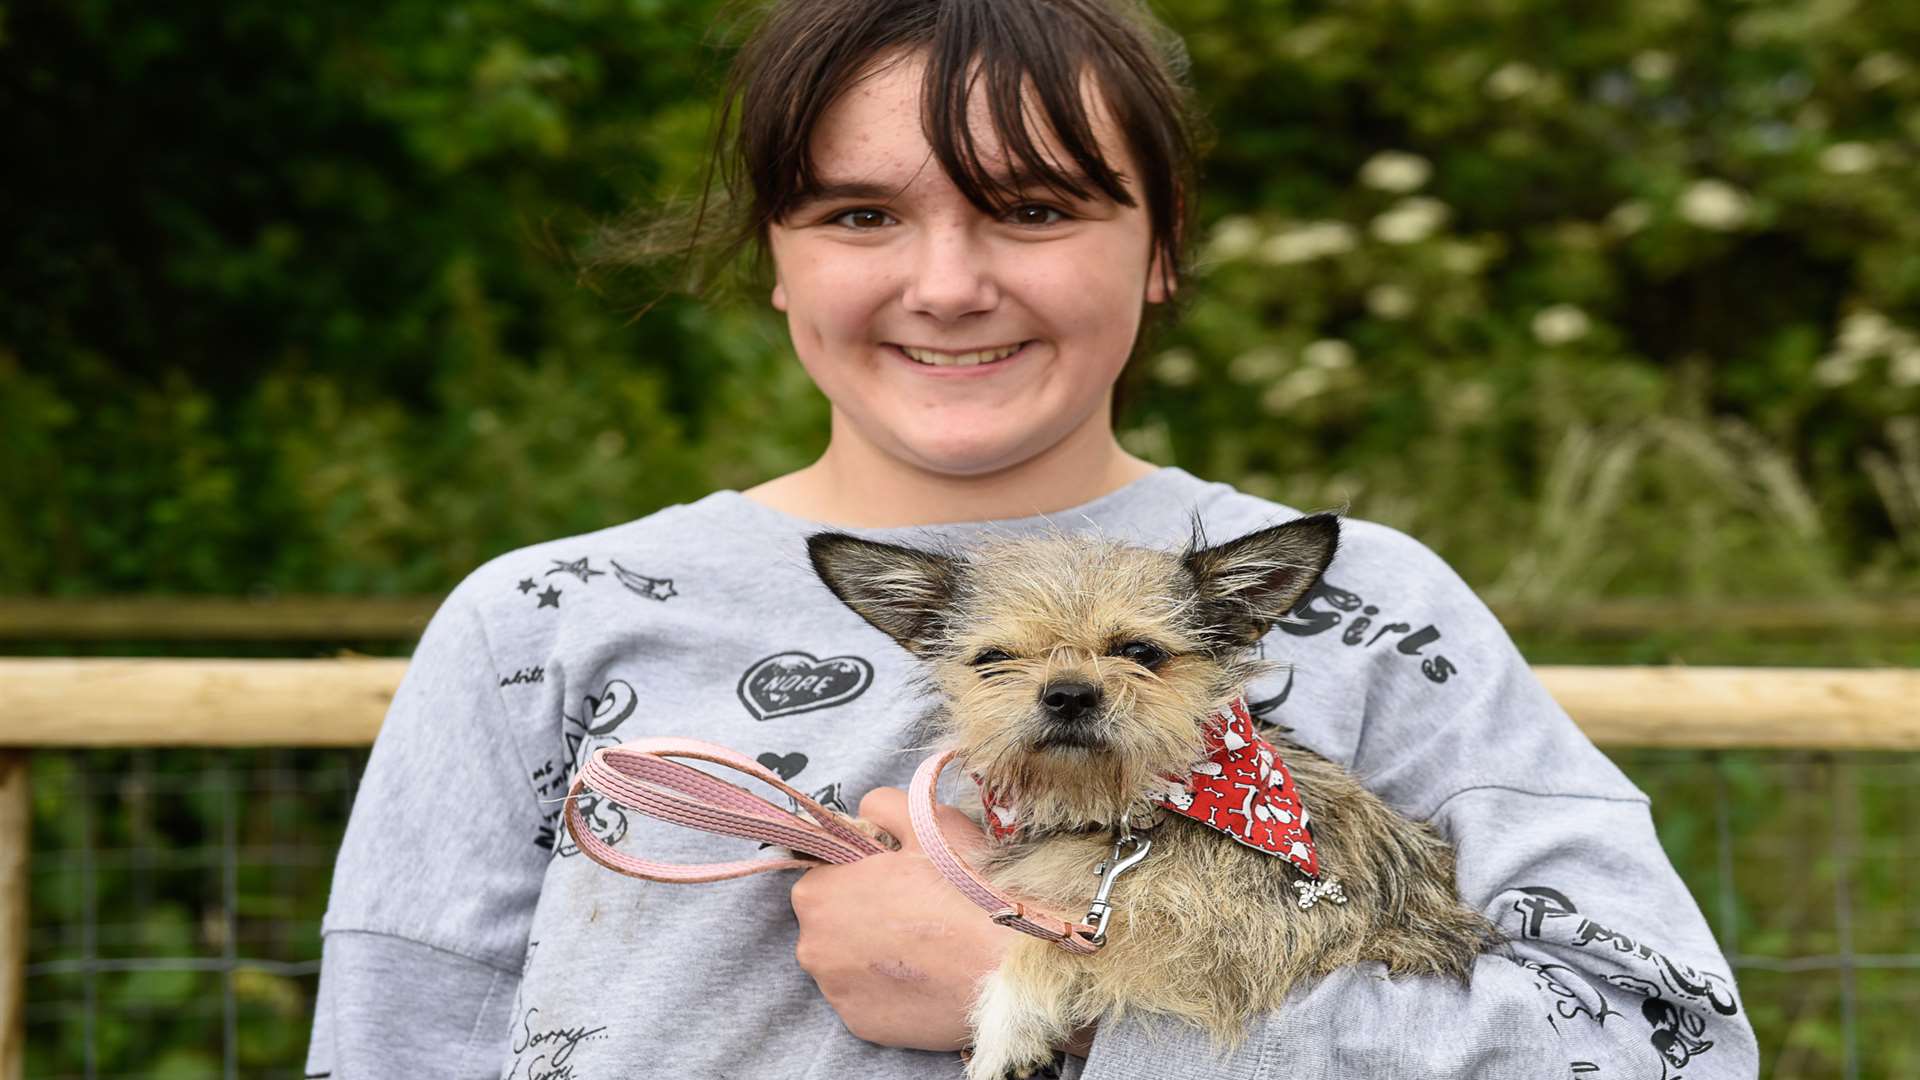 Mia Burgess took part in Happy Endings Rescue dog show with Cookie